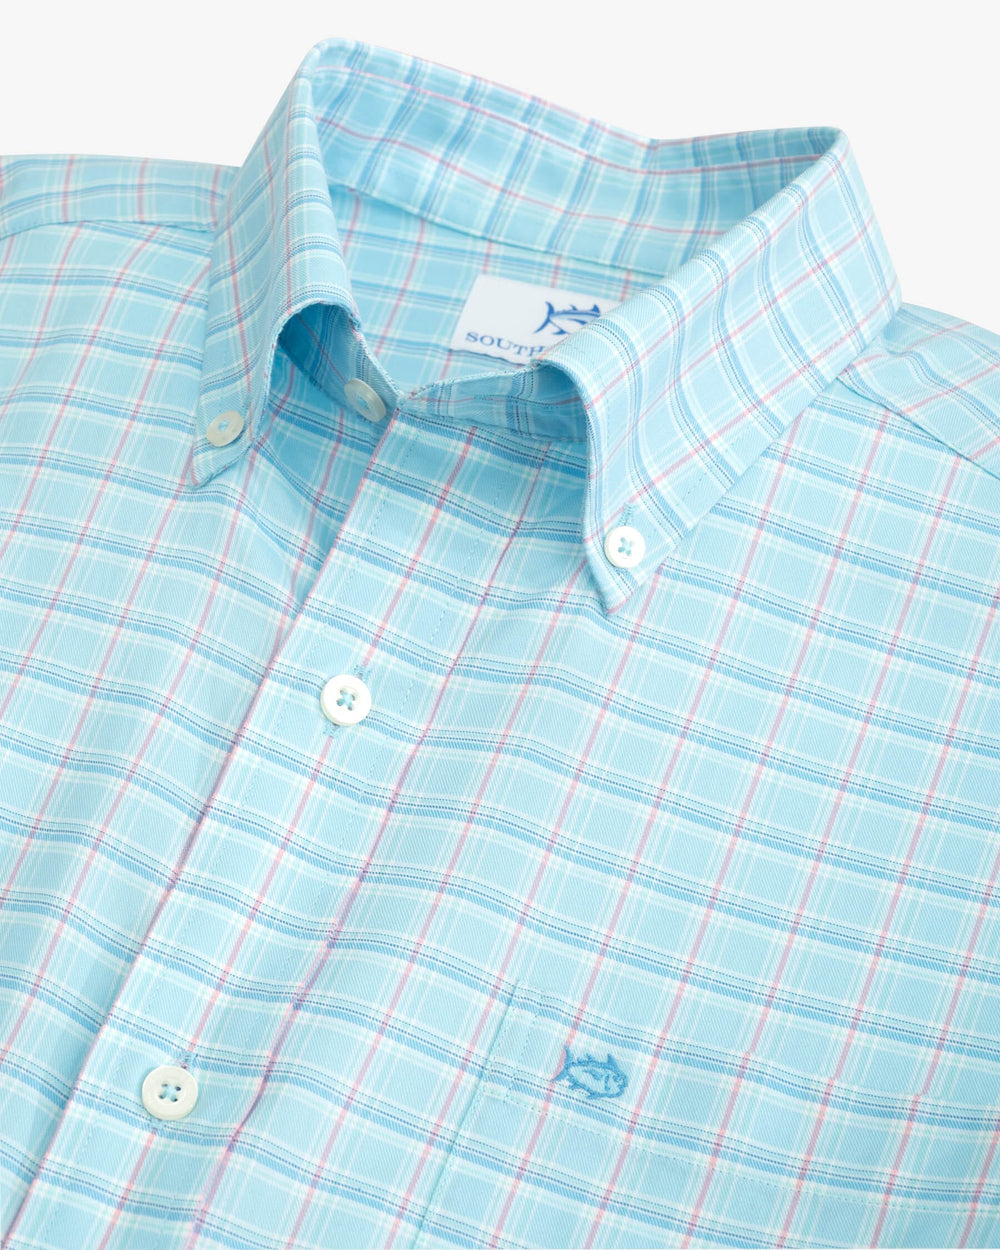 The detail view of the Skipjack Winton Plaid Sport Shirt by Southern Tide - Rain Water